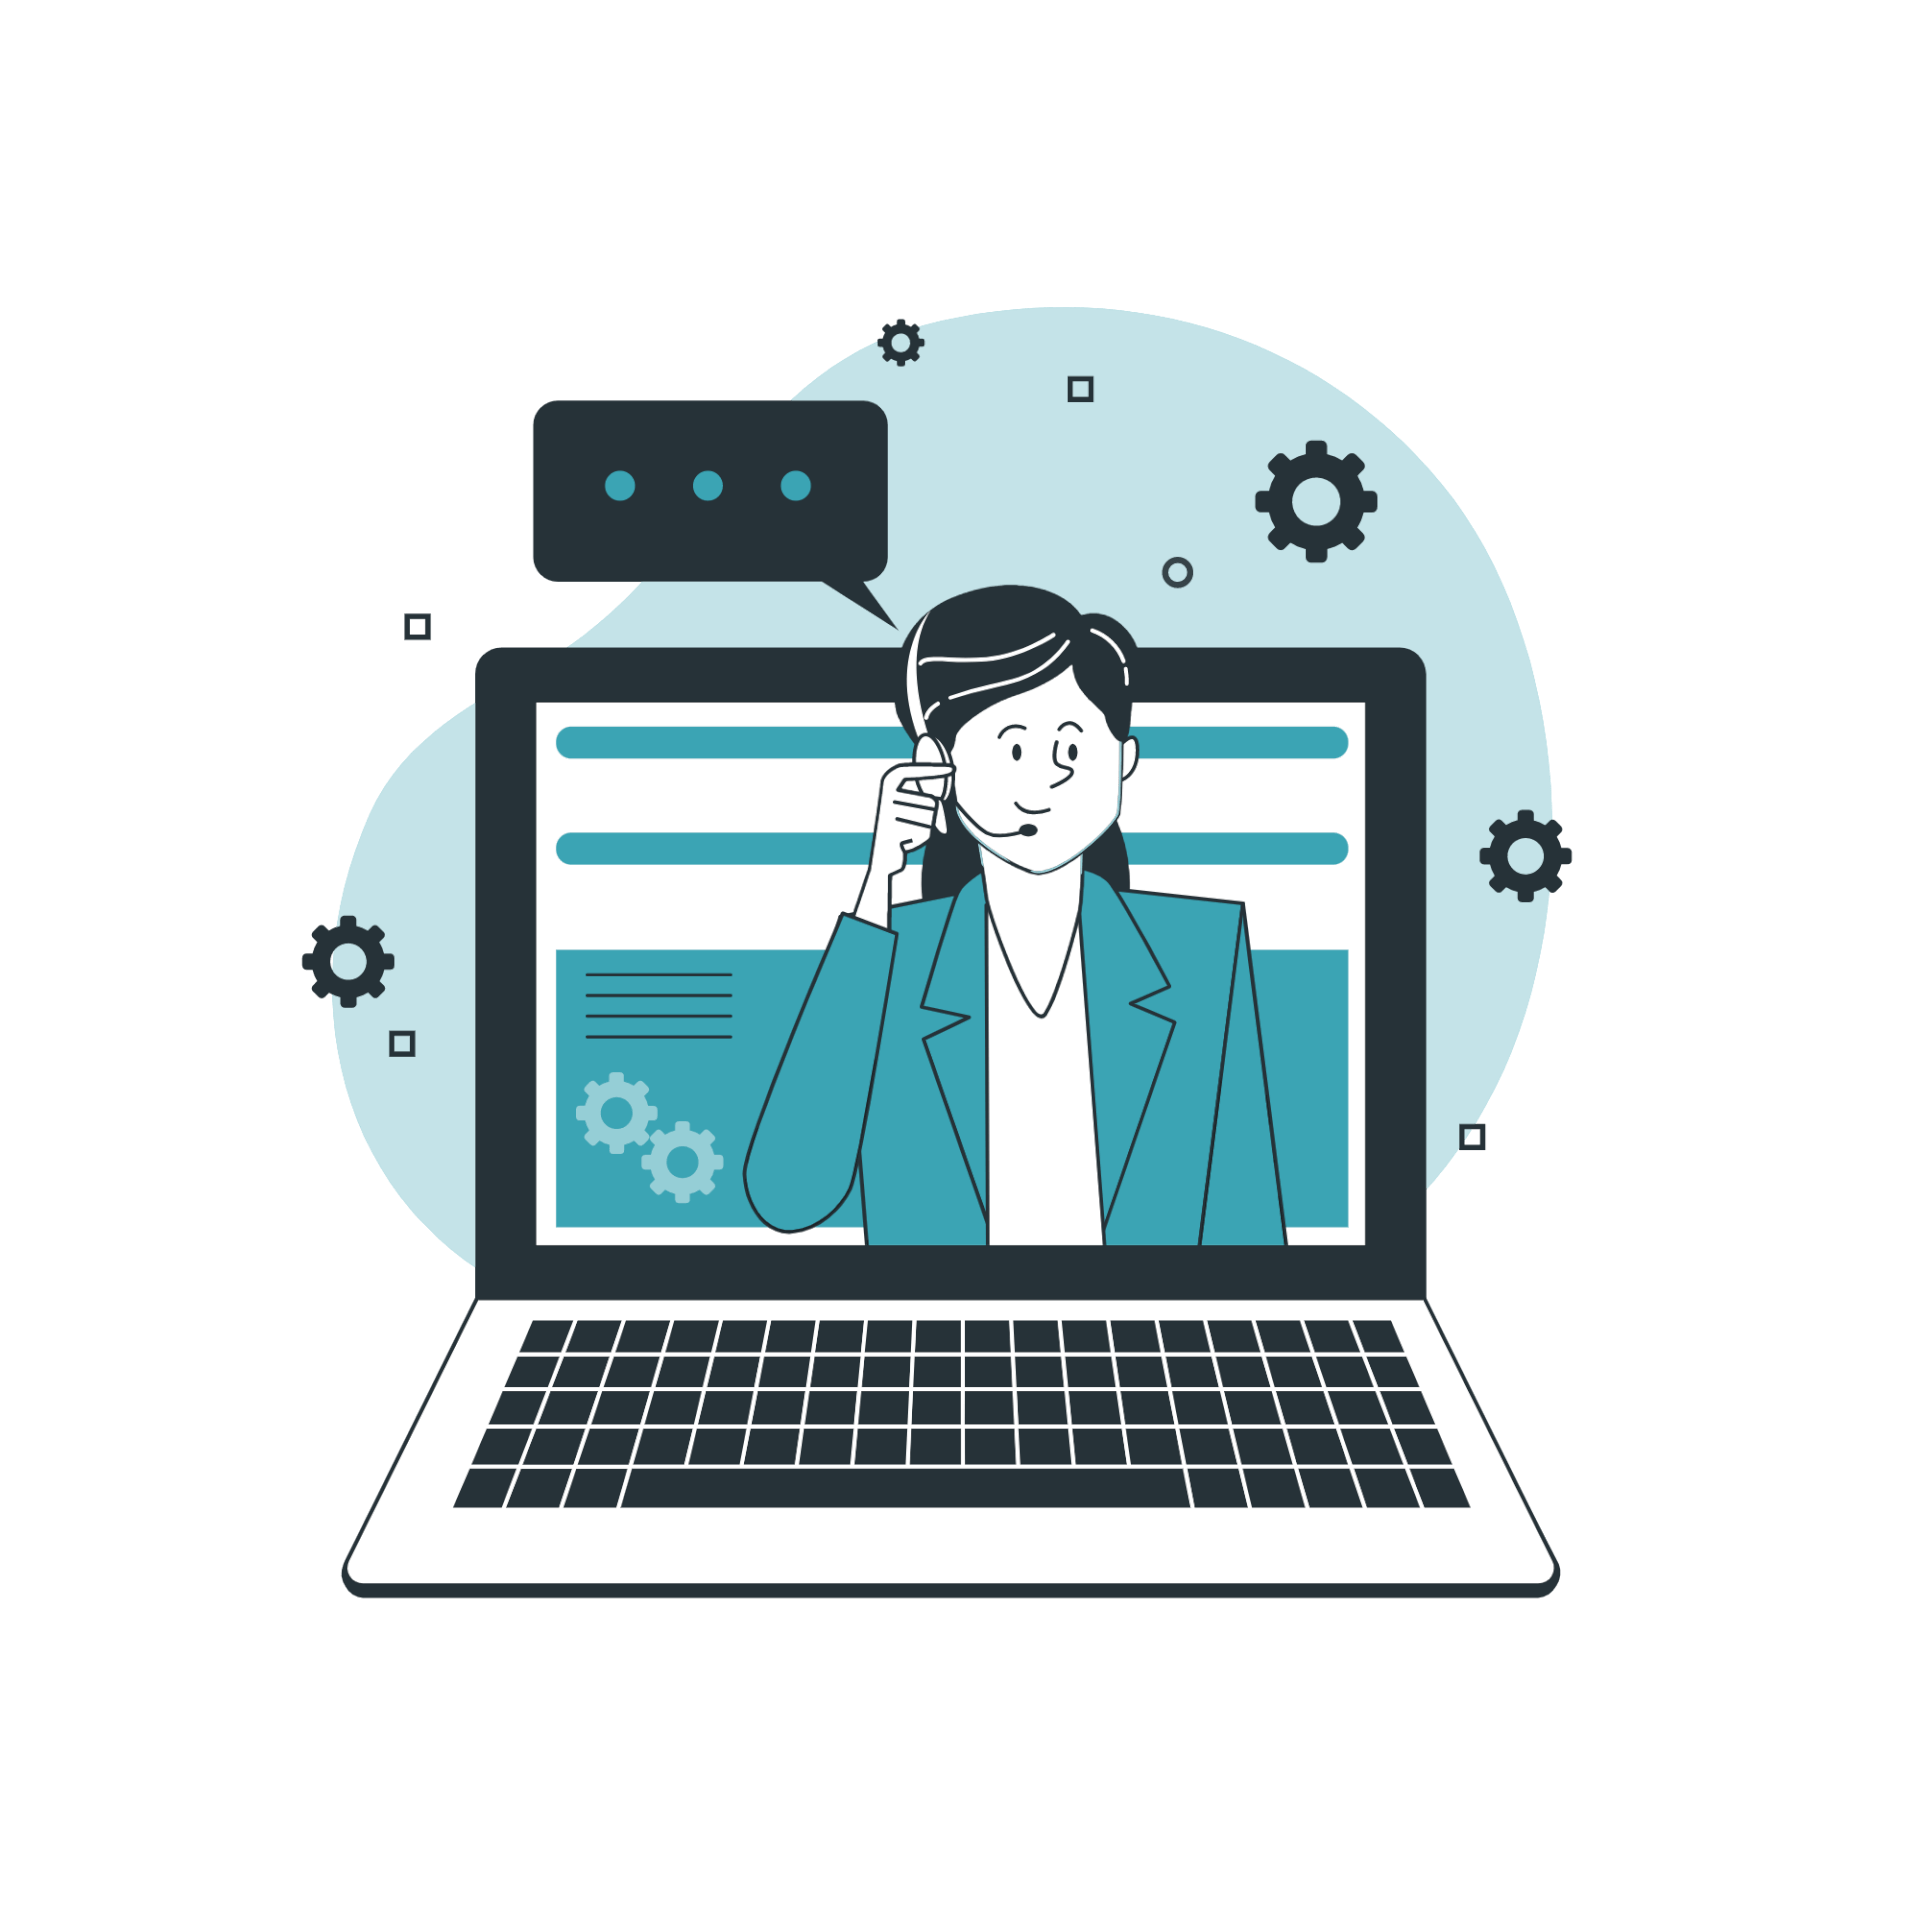 A vector illustration of a businesswoman multitasking on a laptop and phone.